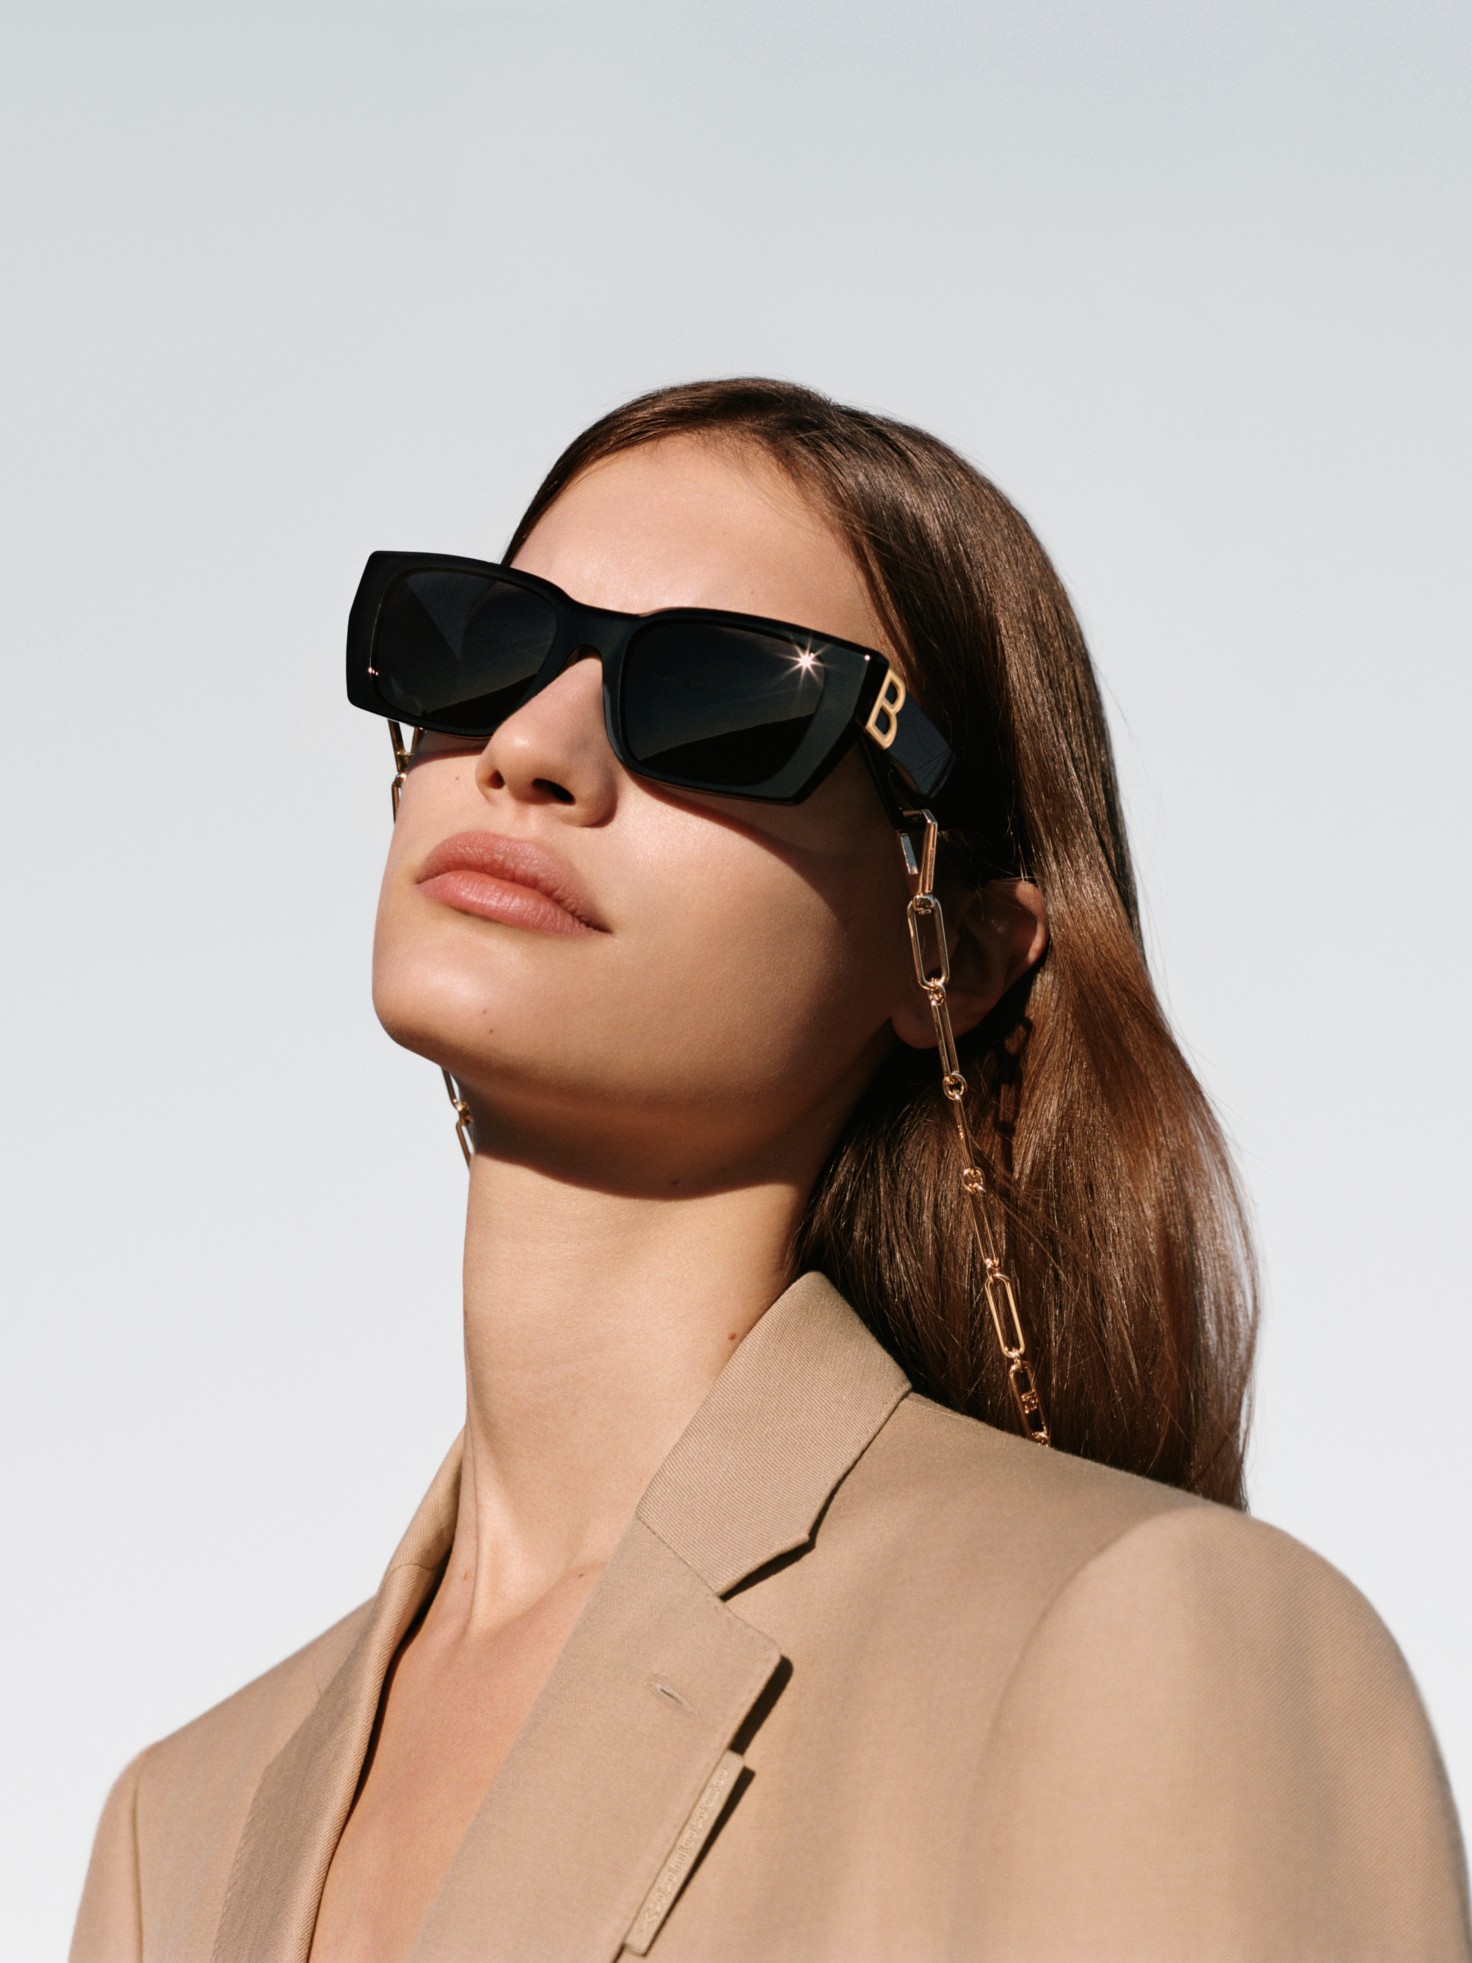 model wearing black square frames with chain